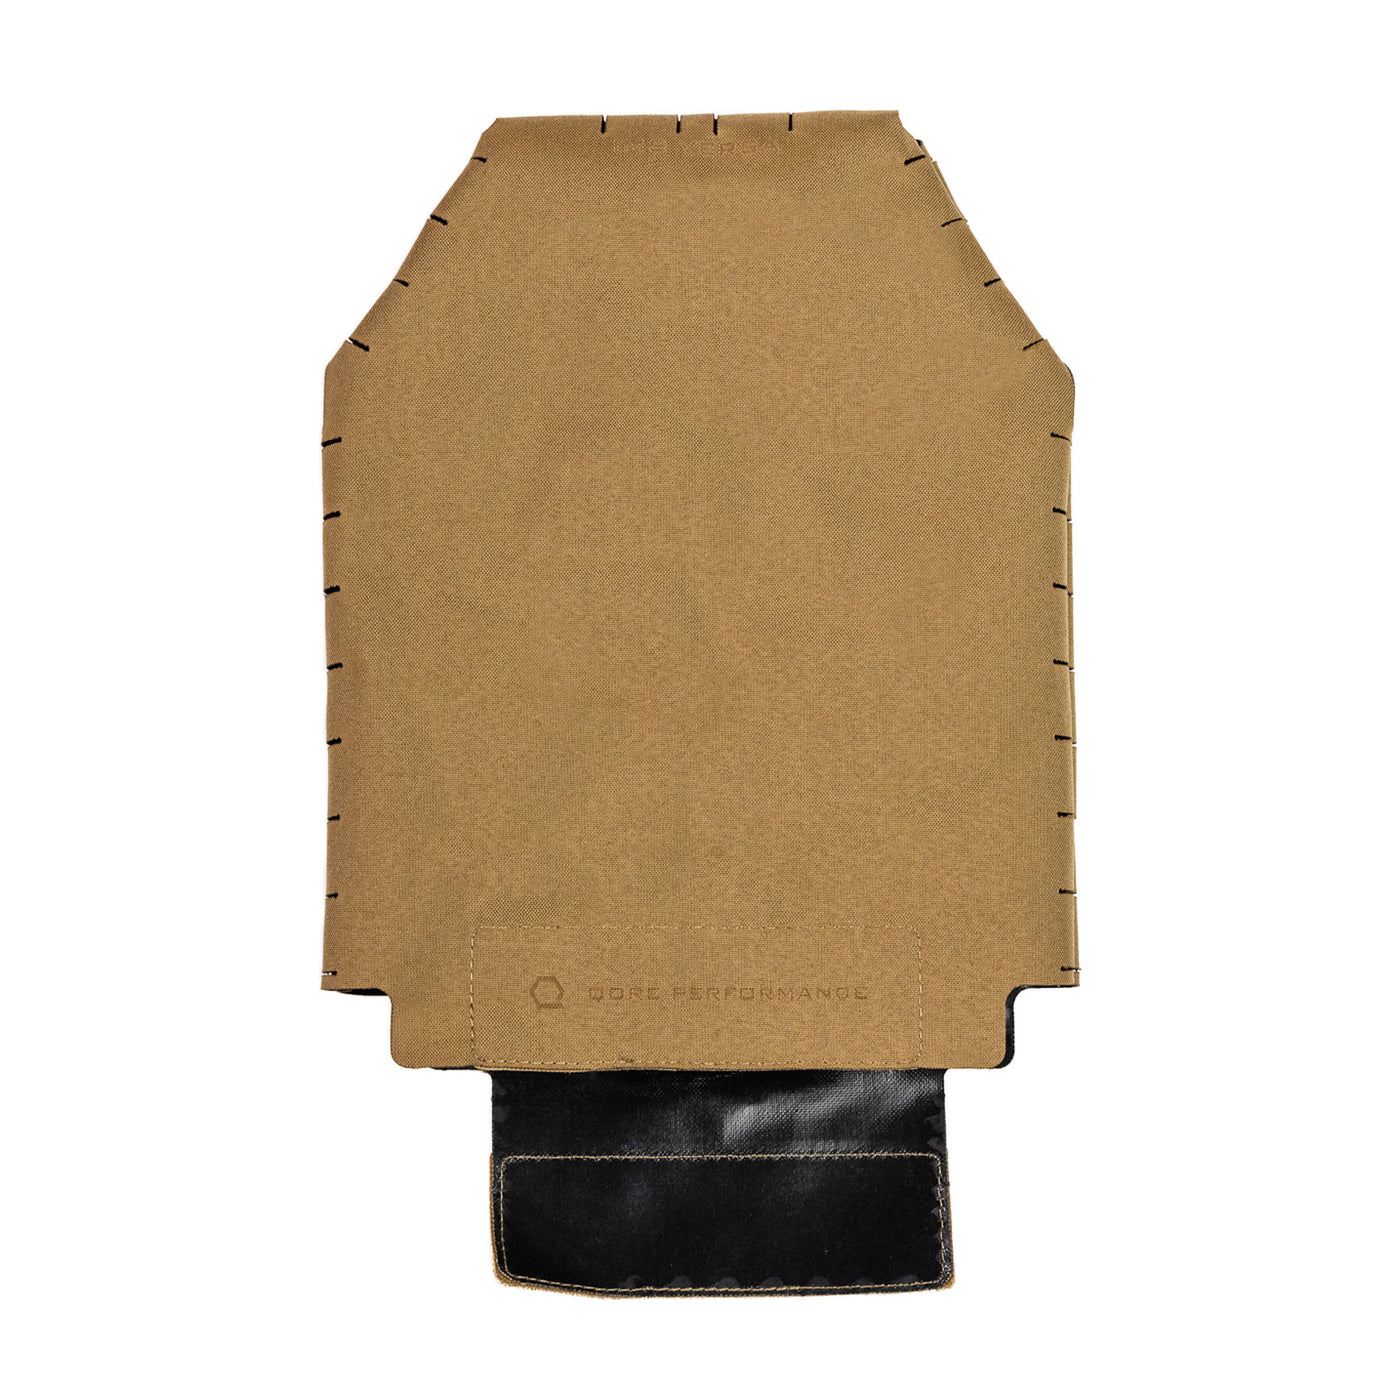 IMS Pro (IcePlate® MOLLE Sleeve Pro uniquement)